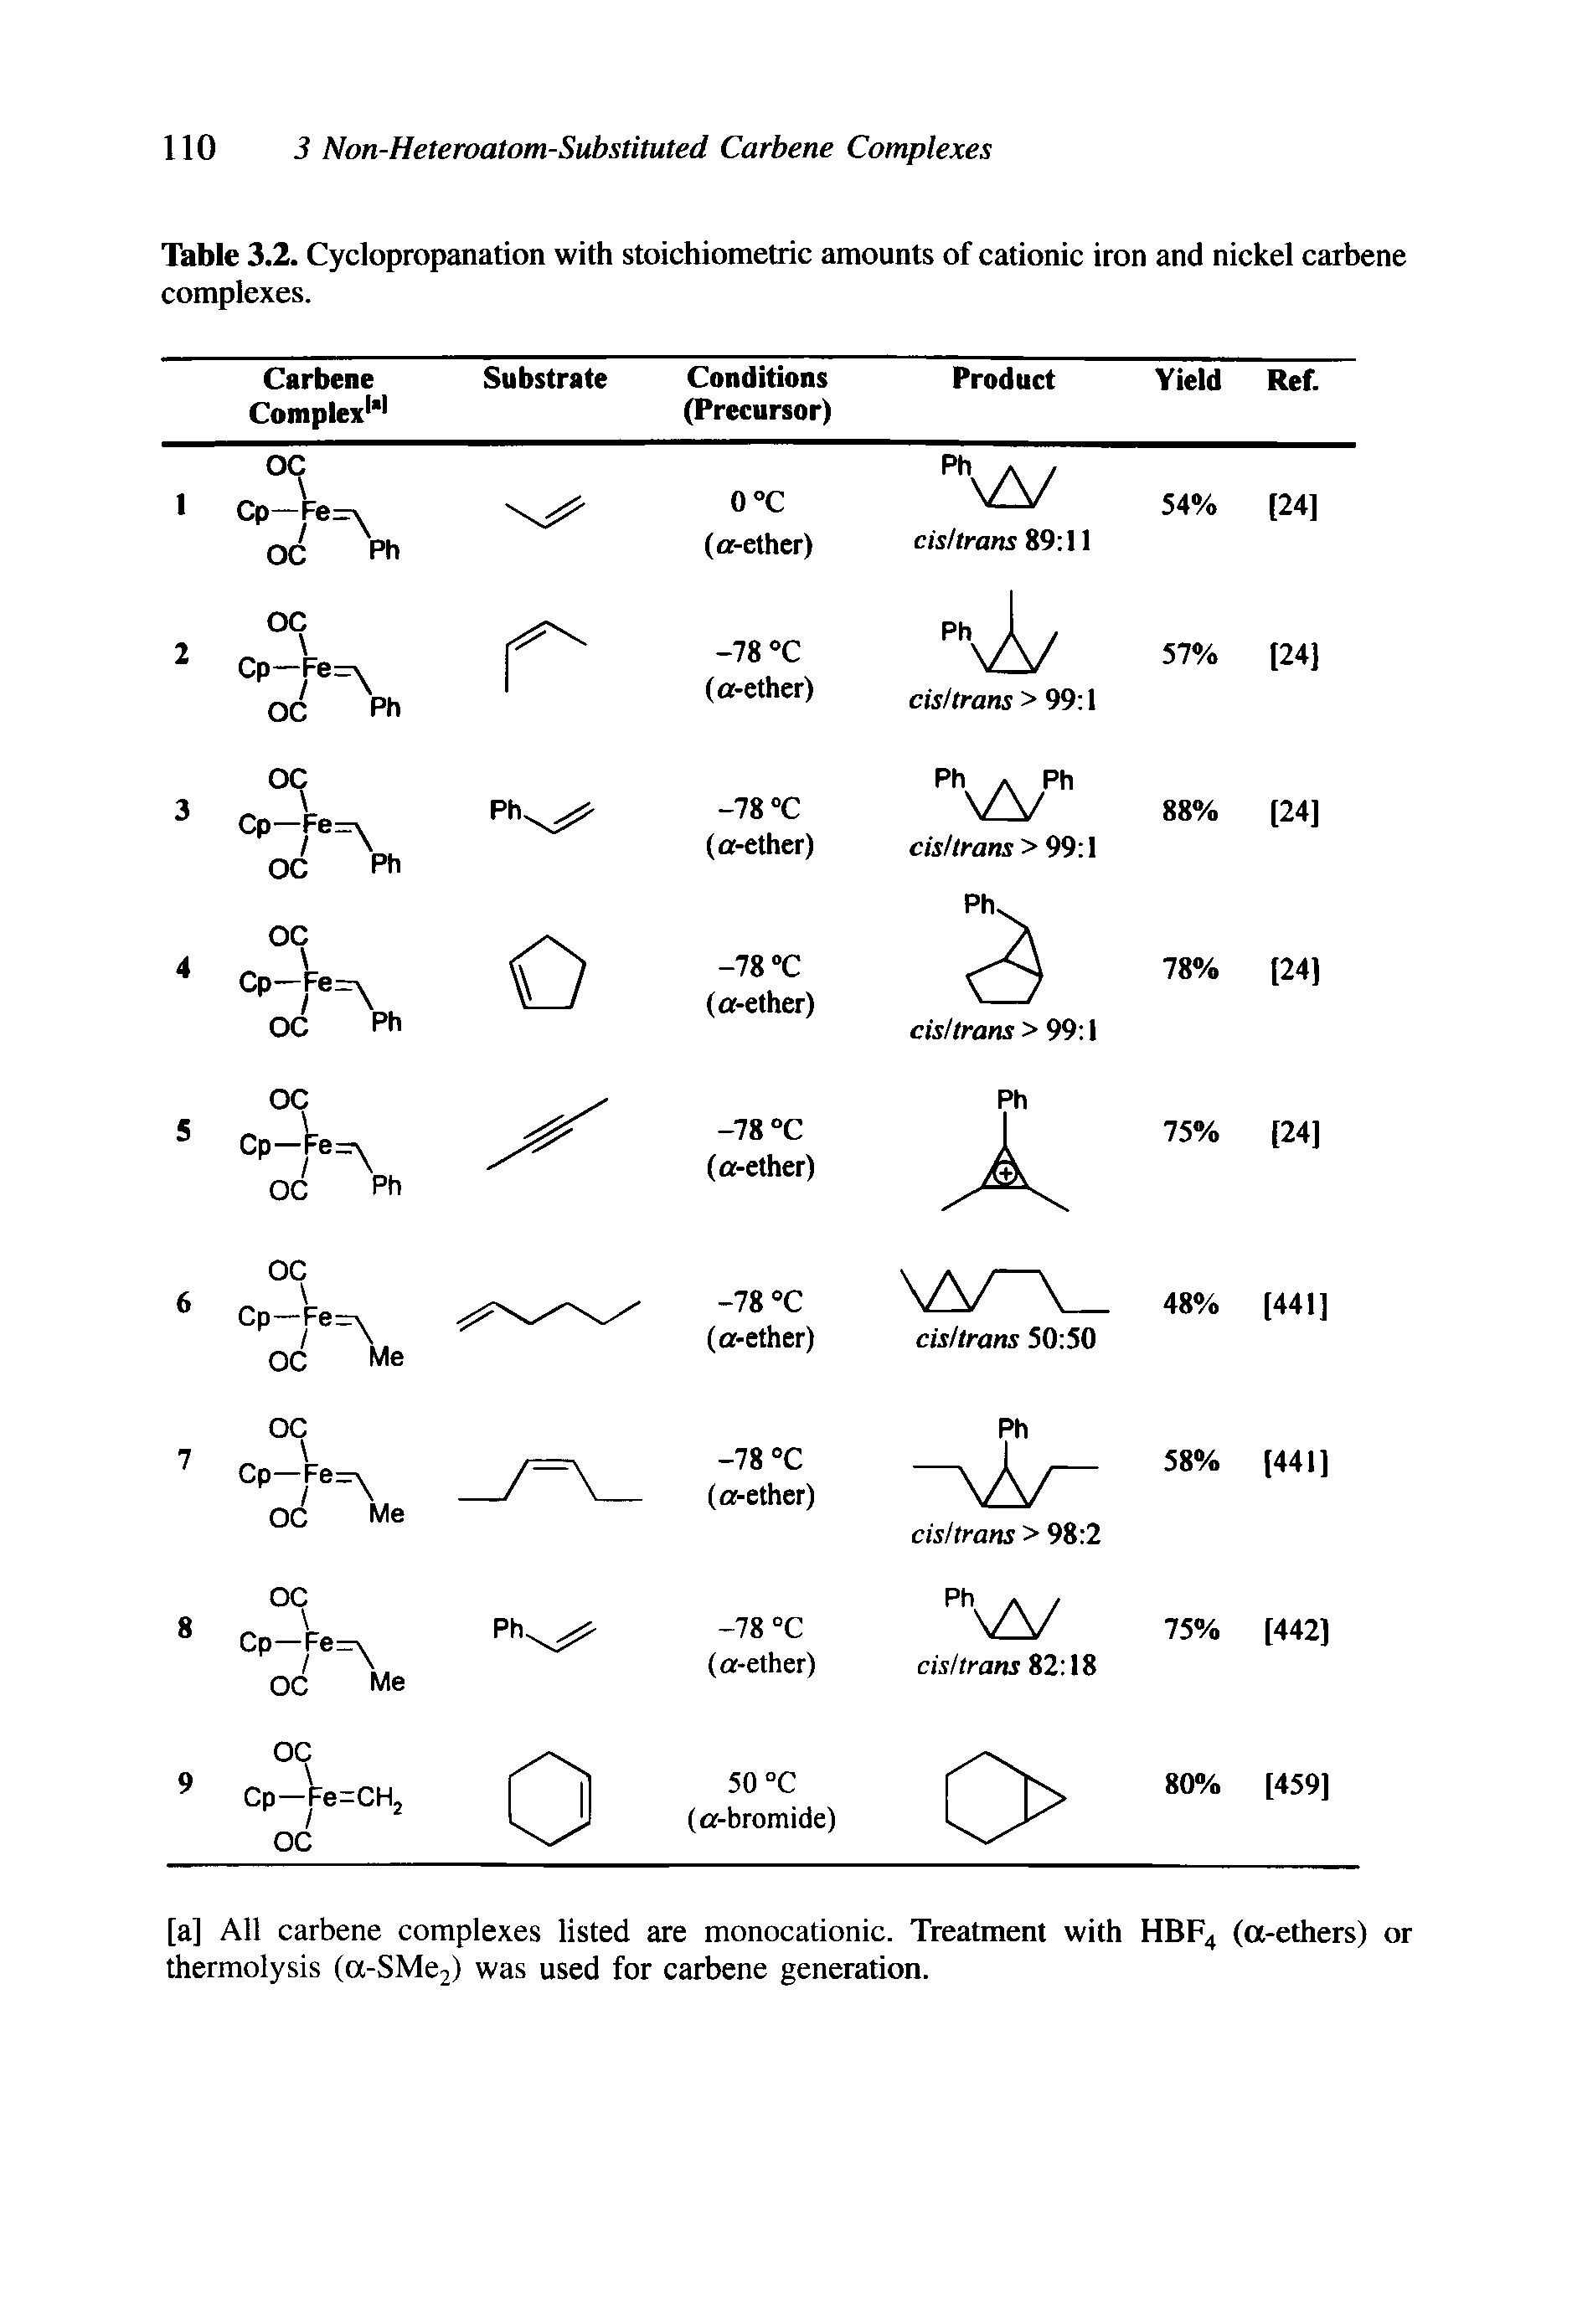 Table 3.2. Cyclopropanation with stoichiometric amounts of cationic iron and nickel carbene complexes.